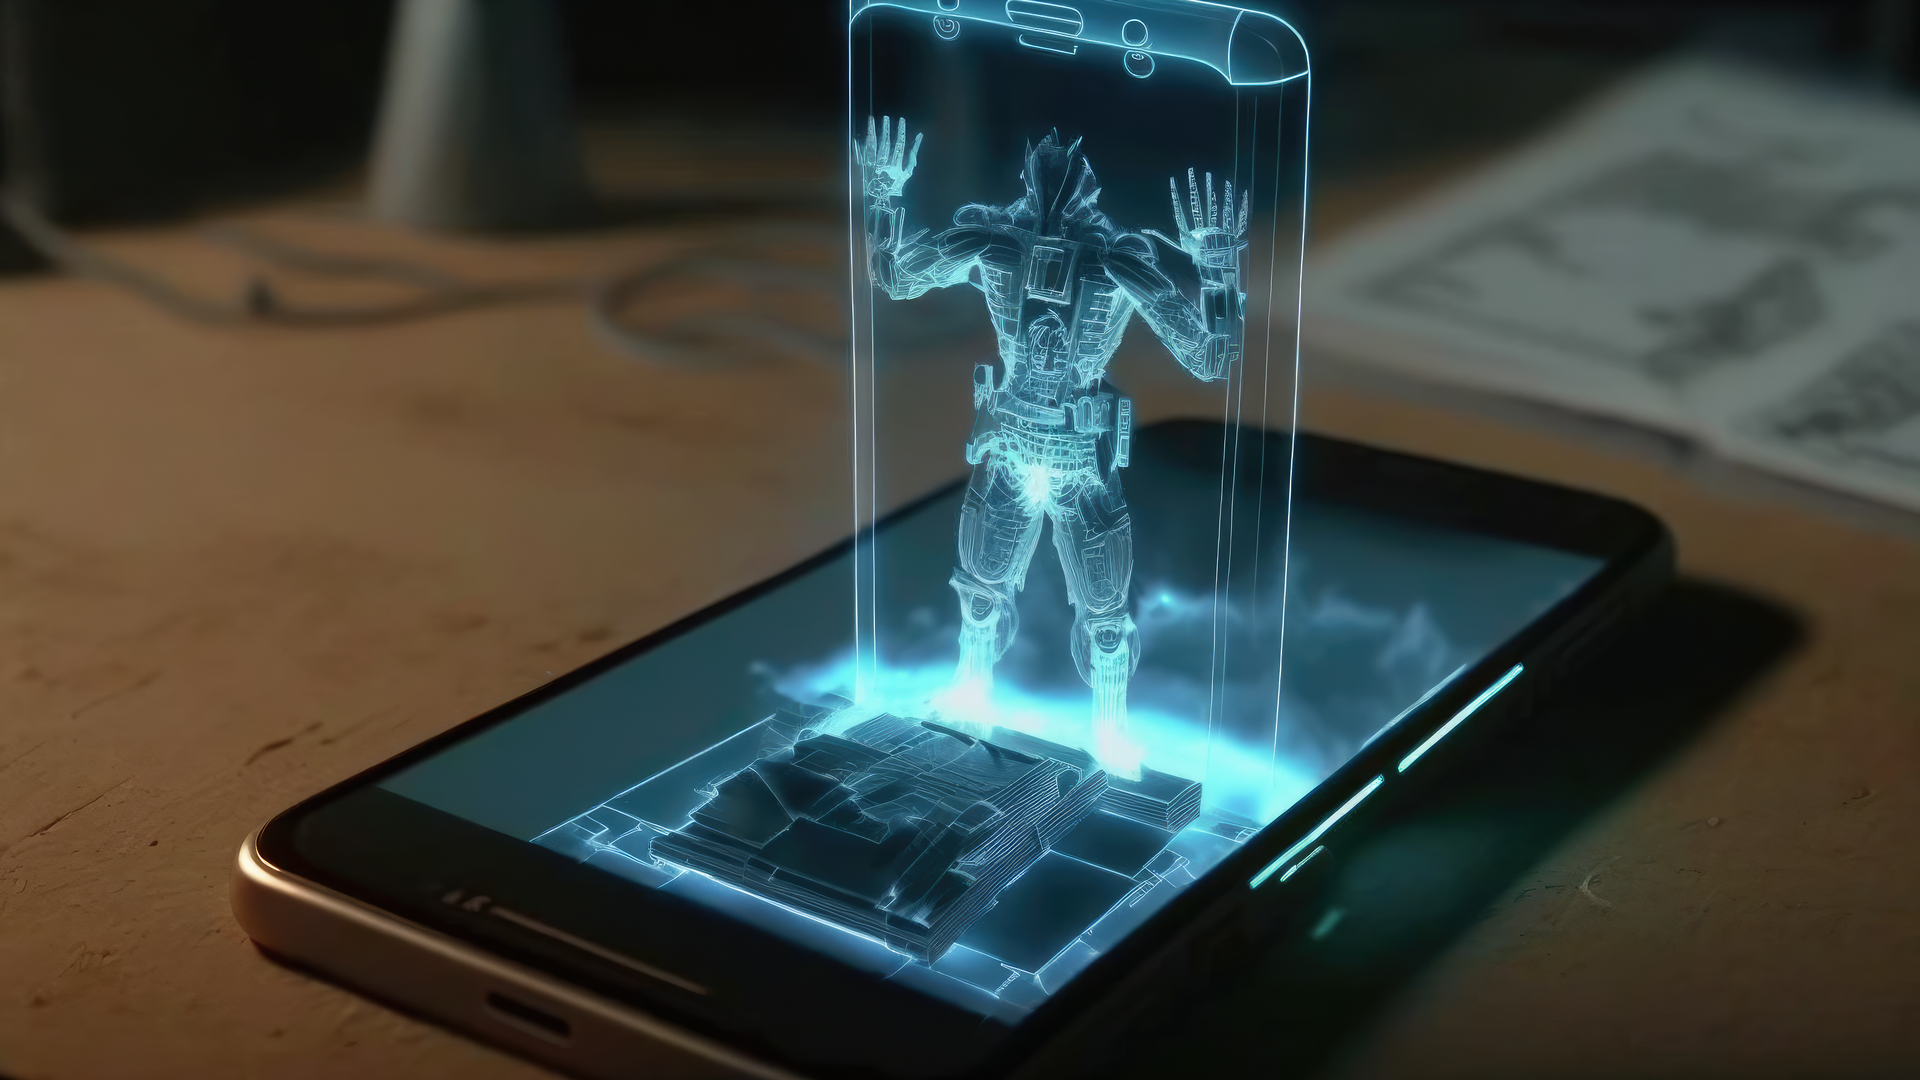 Accenture invests in Looking Glass 3D holograms